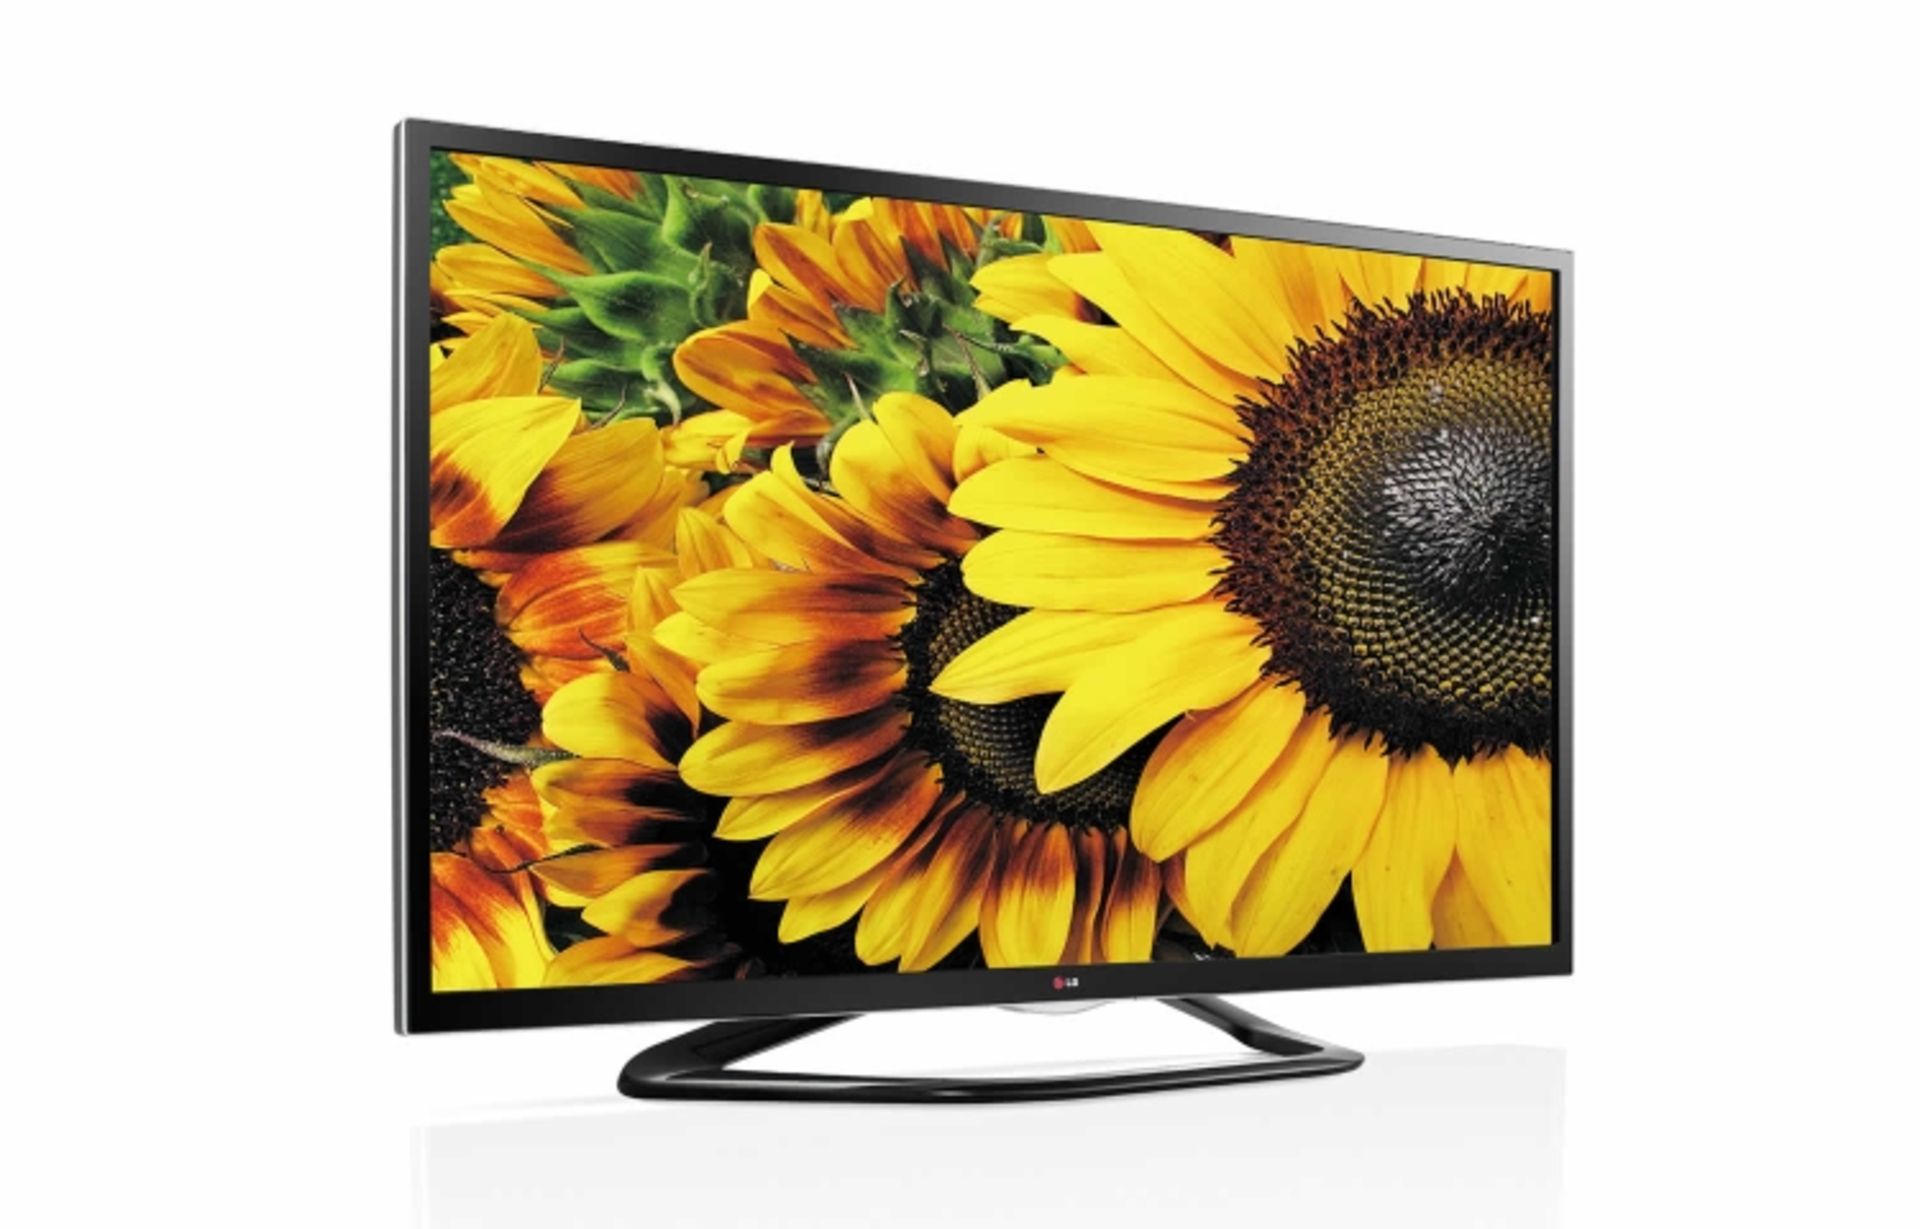 V Grade A 55" FULL HD LED 3D SMART TV WITH FREEVIEW & WIFI 55LA6418 (Item Will Be Available Approx 5